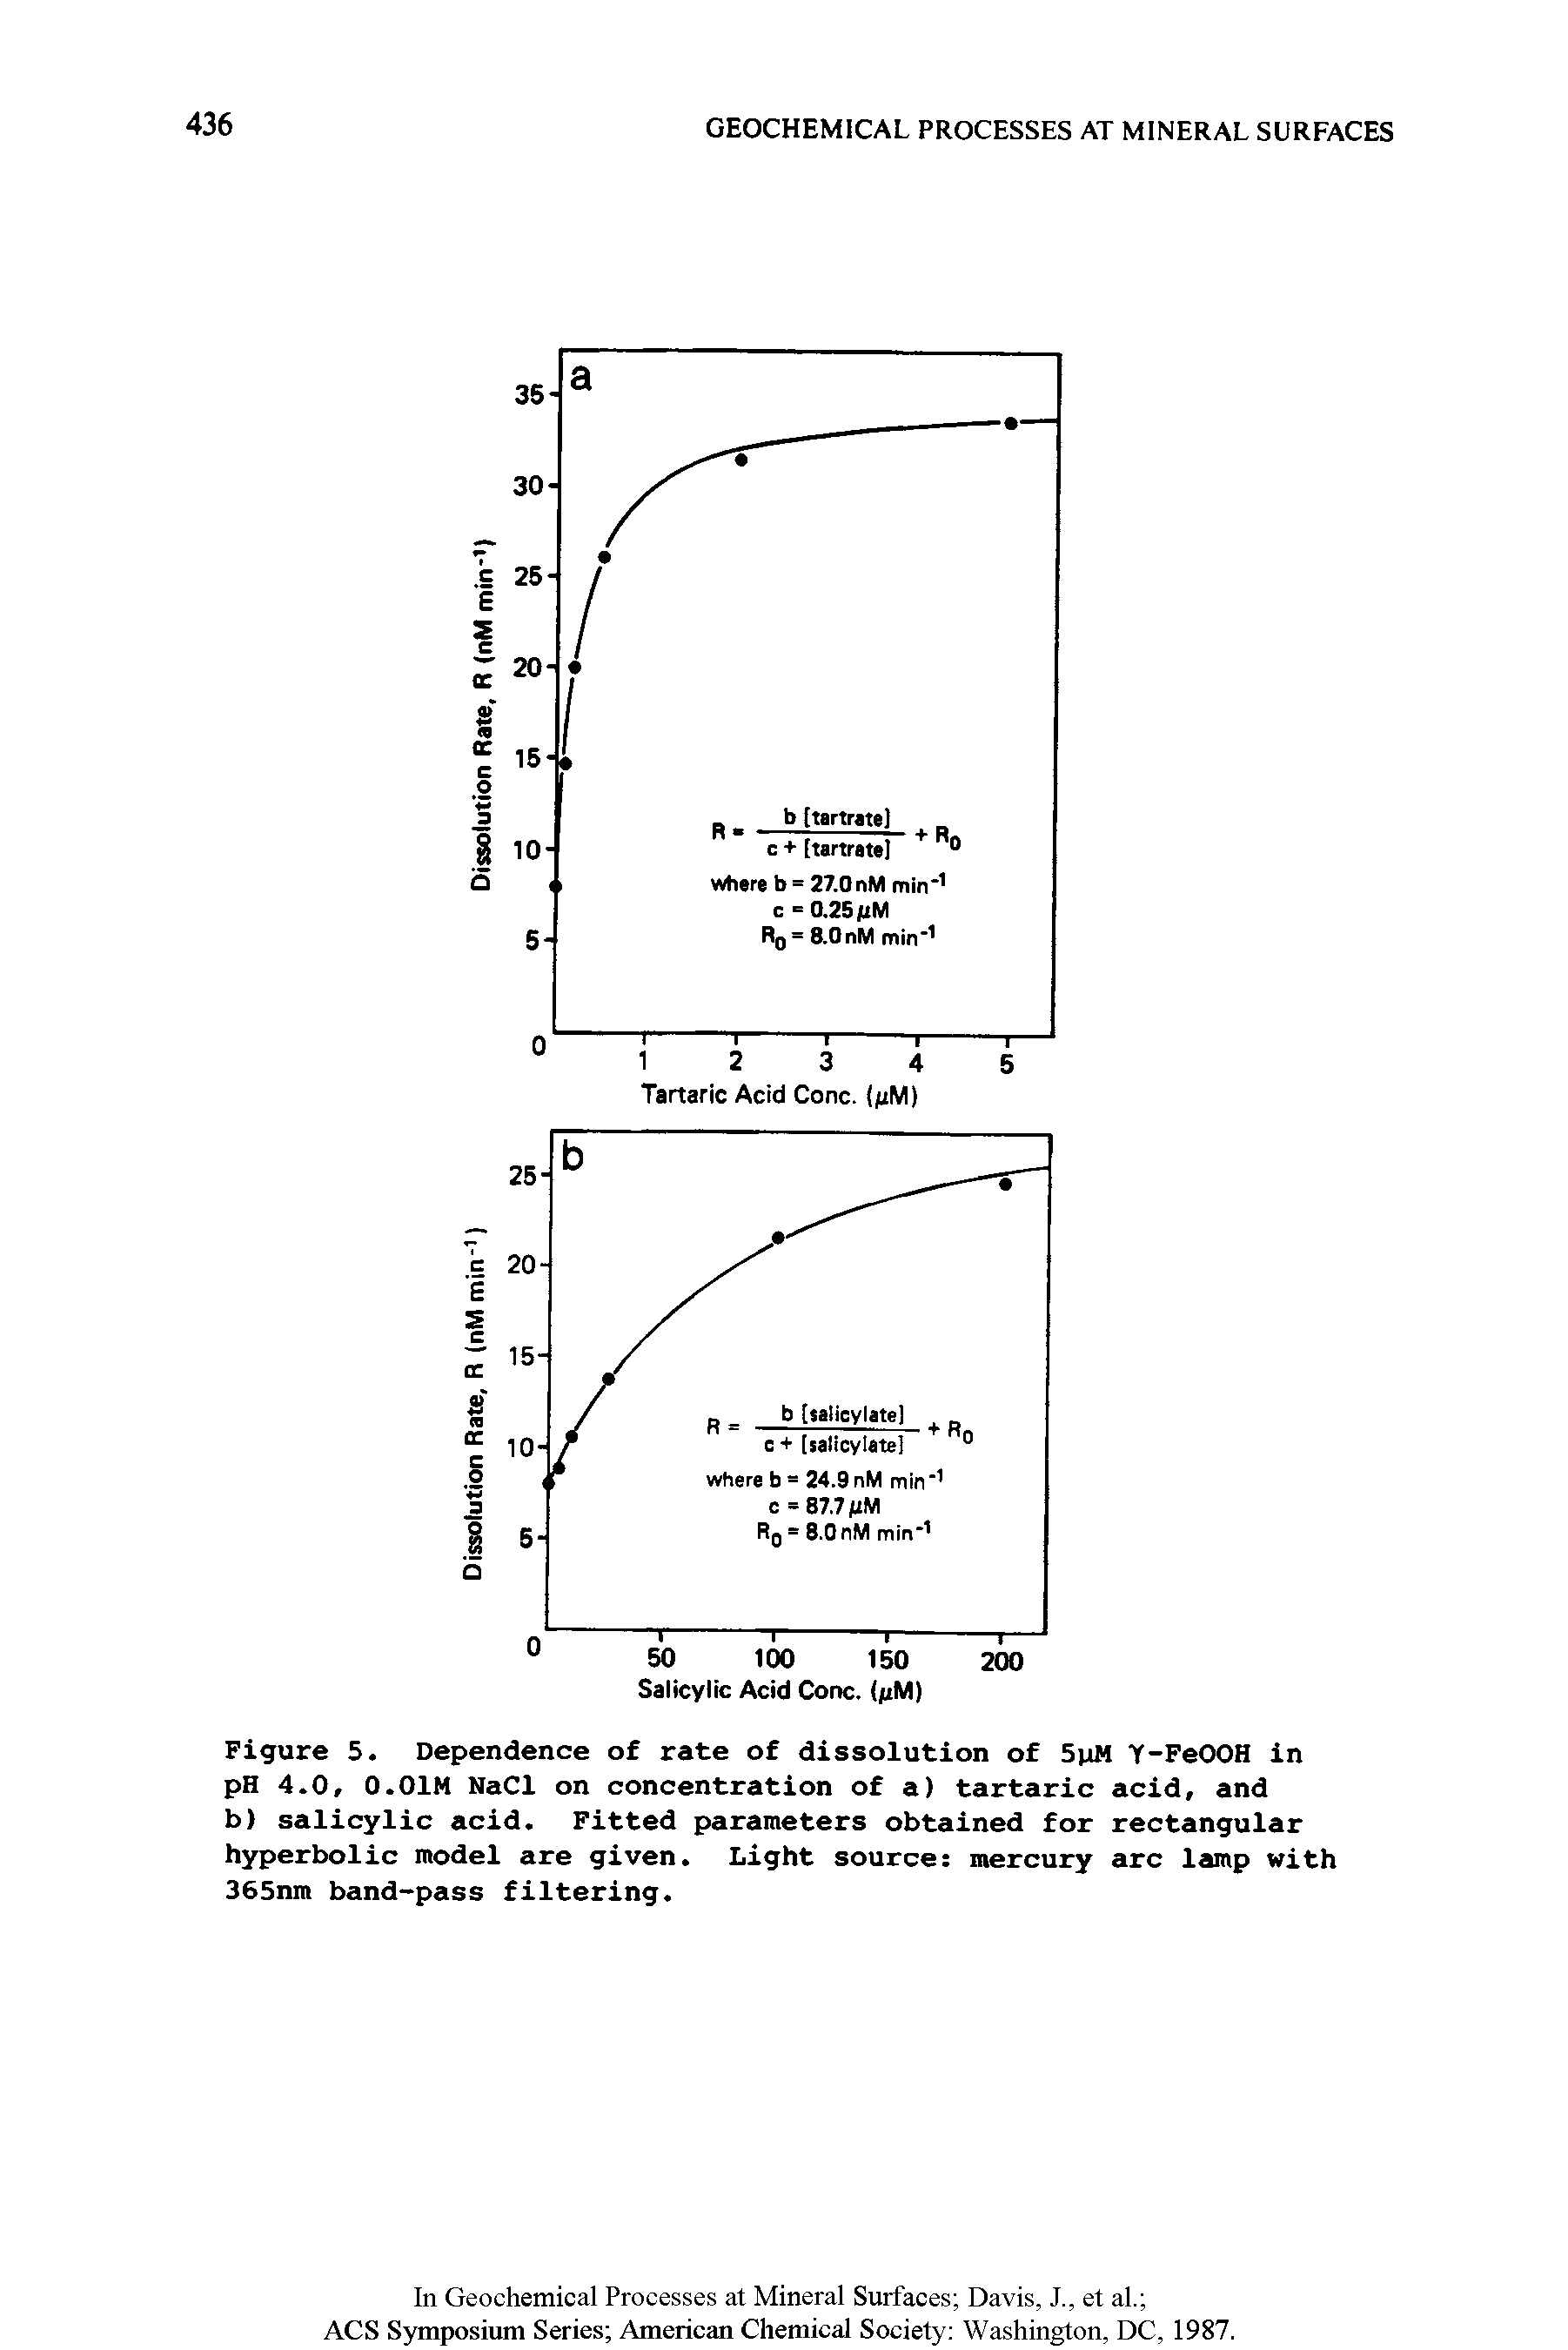 Figure 5. Dependence of rate of dissolution of 5pM Y-FeOOH in pH 4.0, 0.01M NaCl on concentration of a) tartaric acid, and b) salicylic acid. Fitted parameters obtained for rectangular hyperbolic model are given. Light source mercury arc lamp with 365nm band-pass filtering.